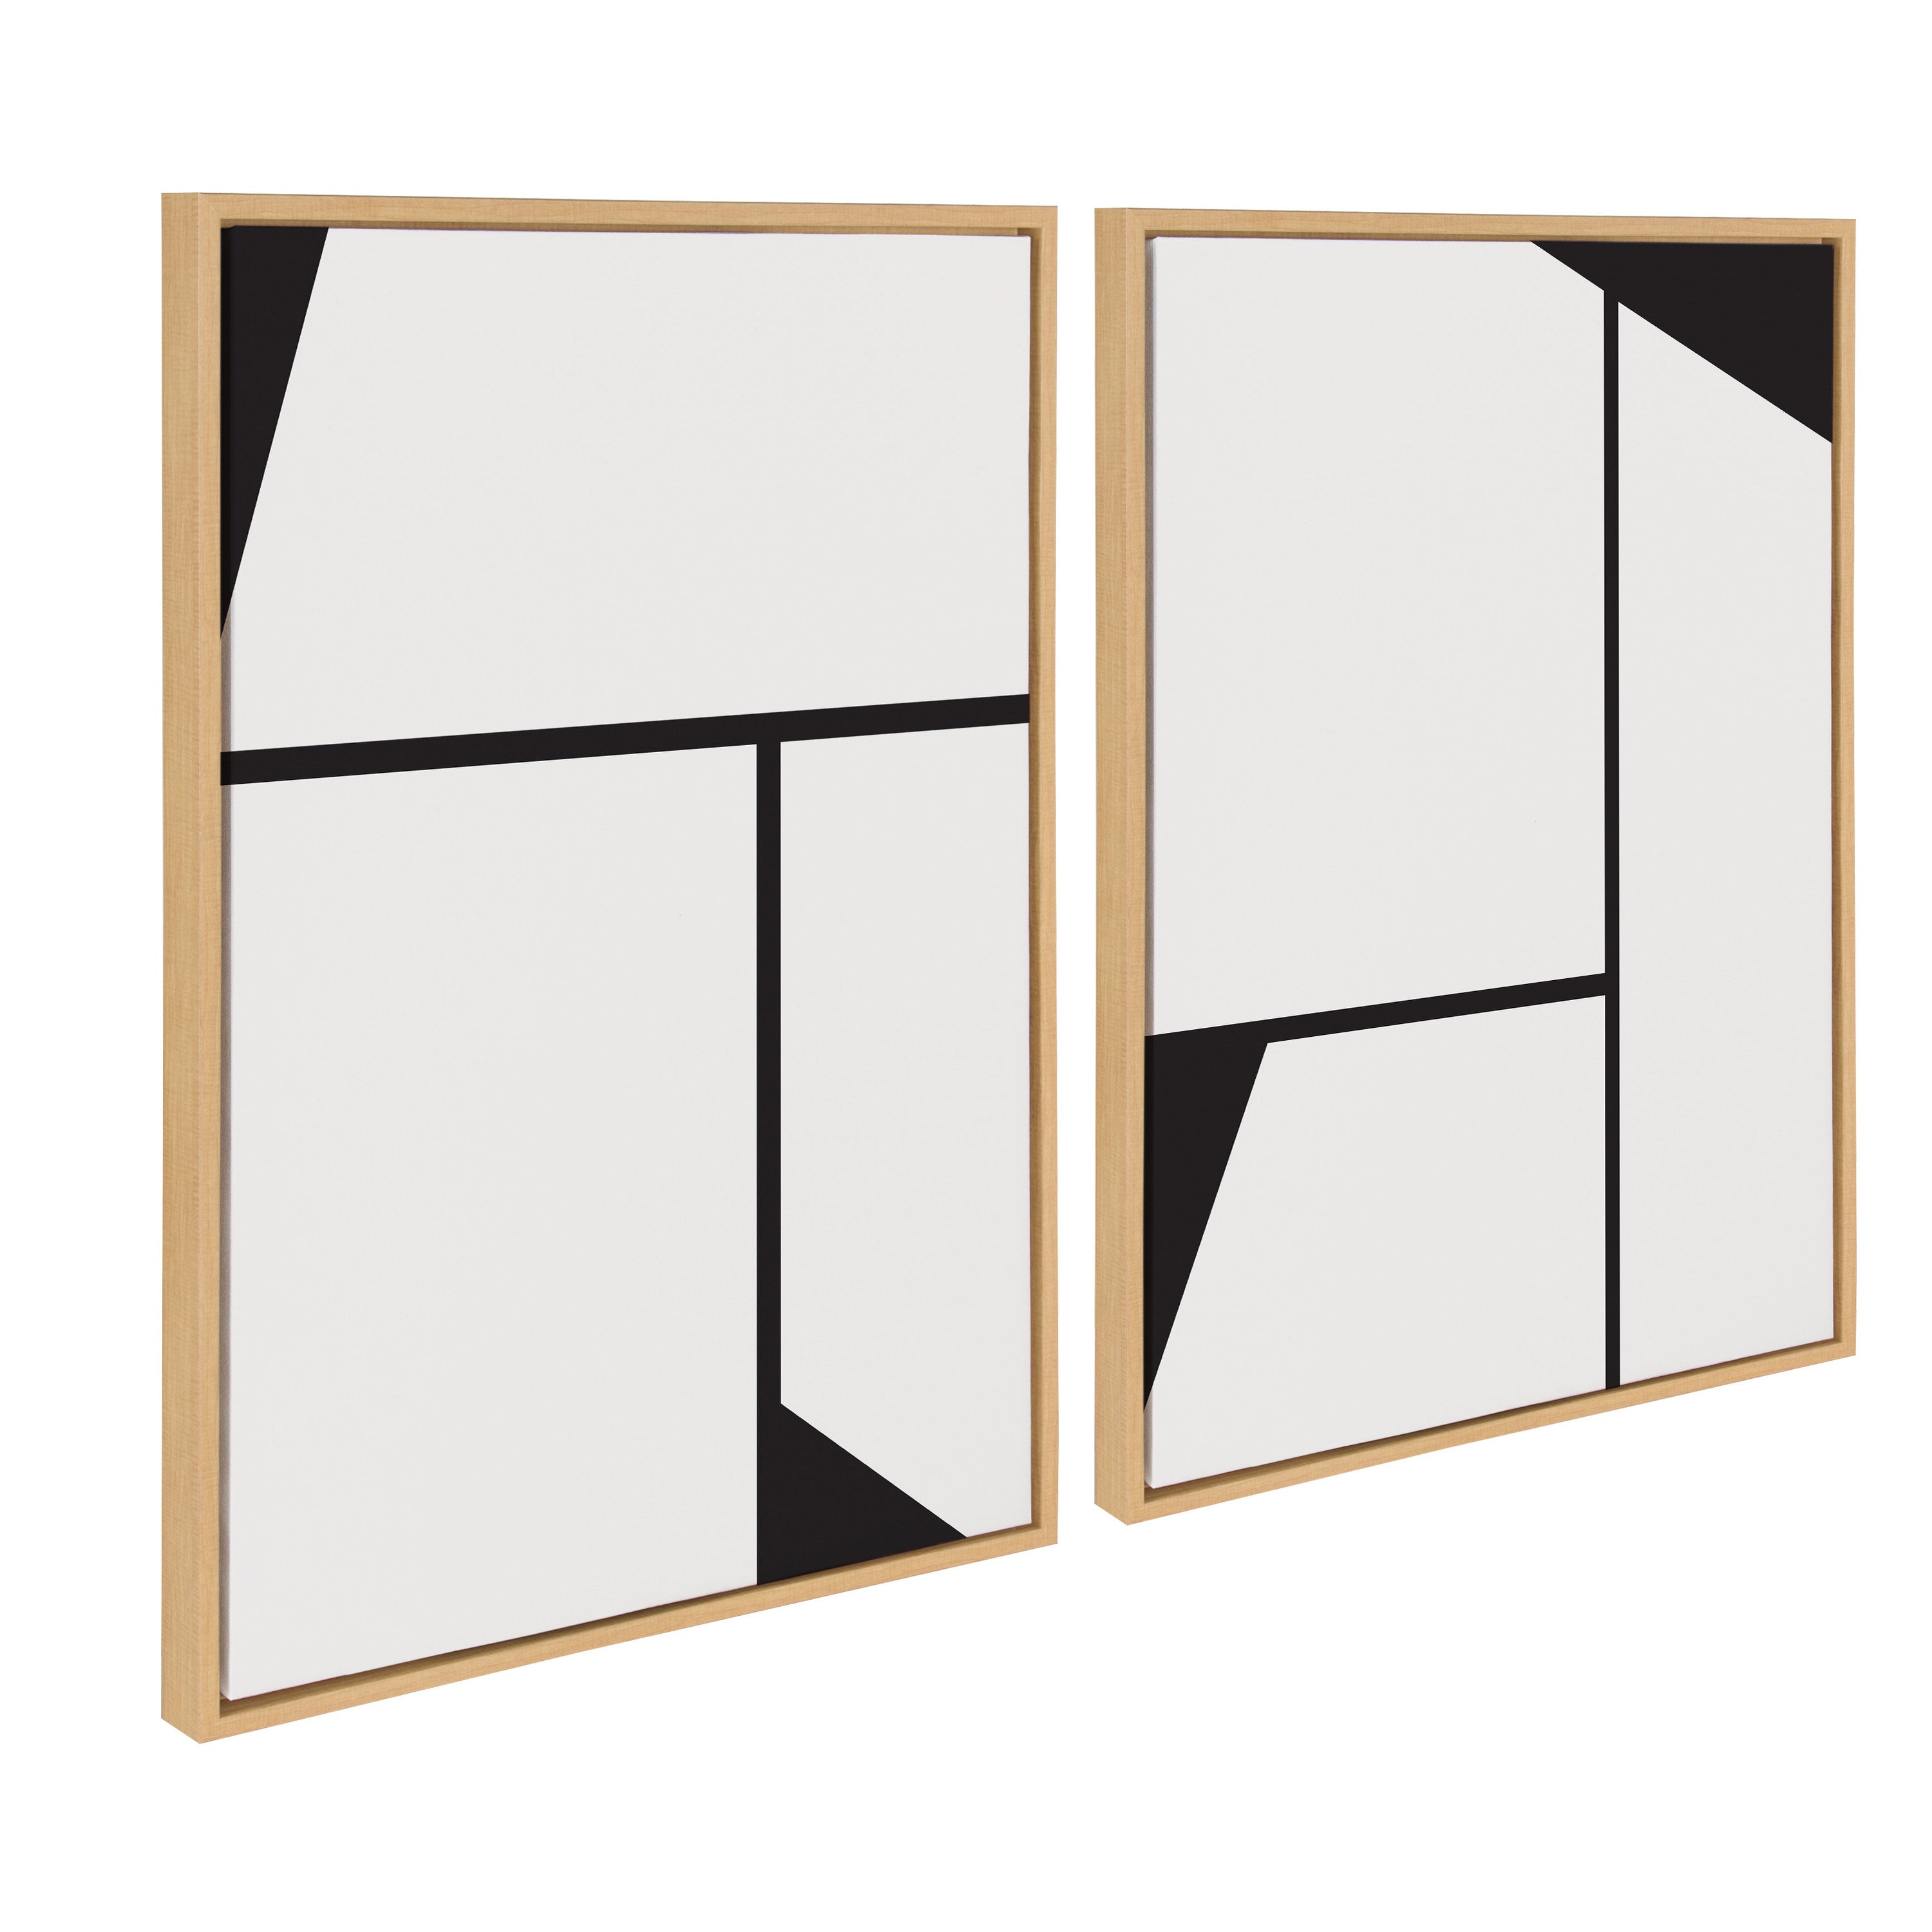 Sylvie Sleek Luxe Minimalist Black and White Abstract Framed Canvas Art Set by The Creative Bunch Studio